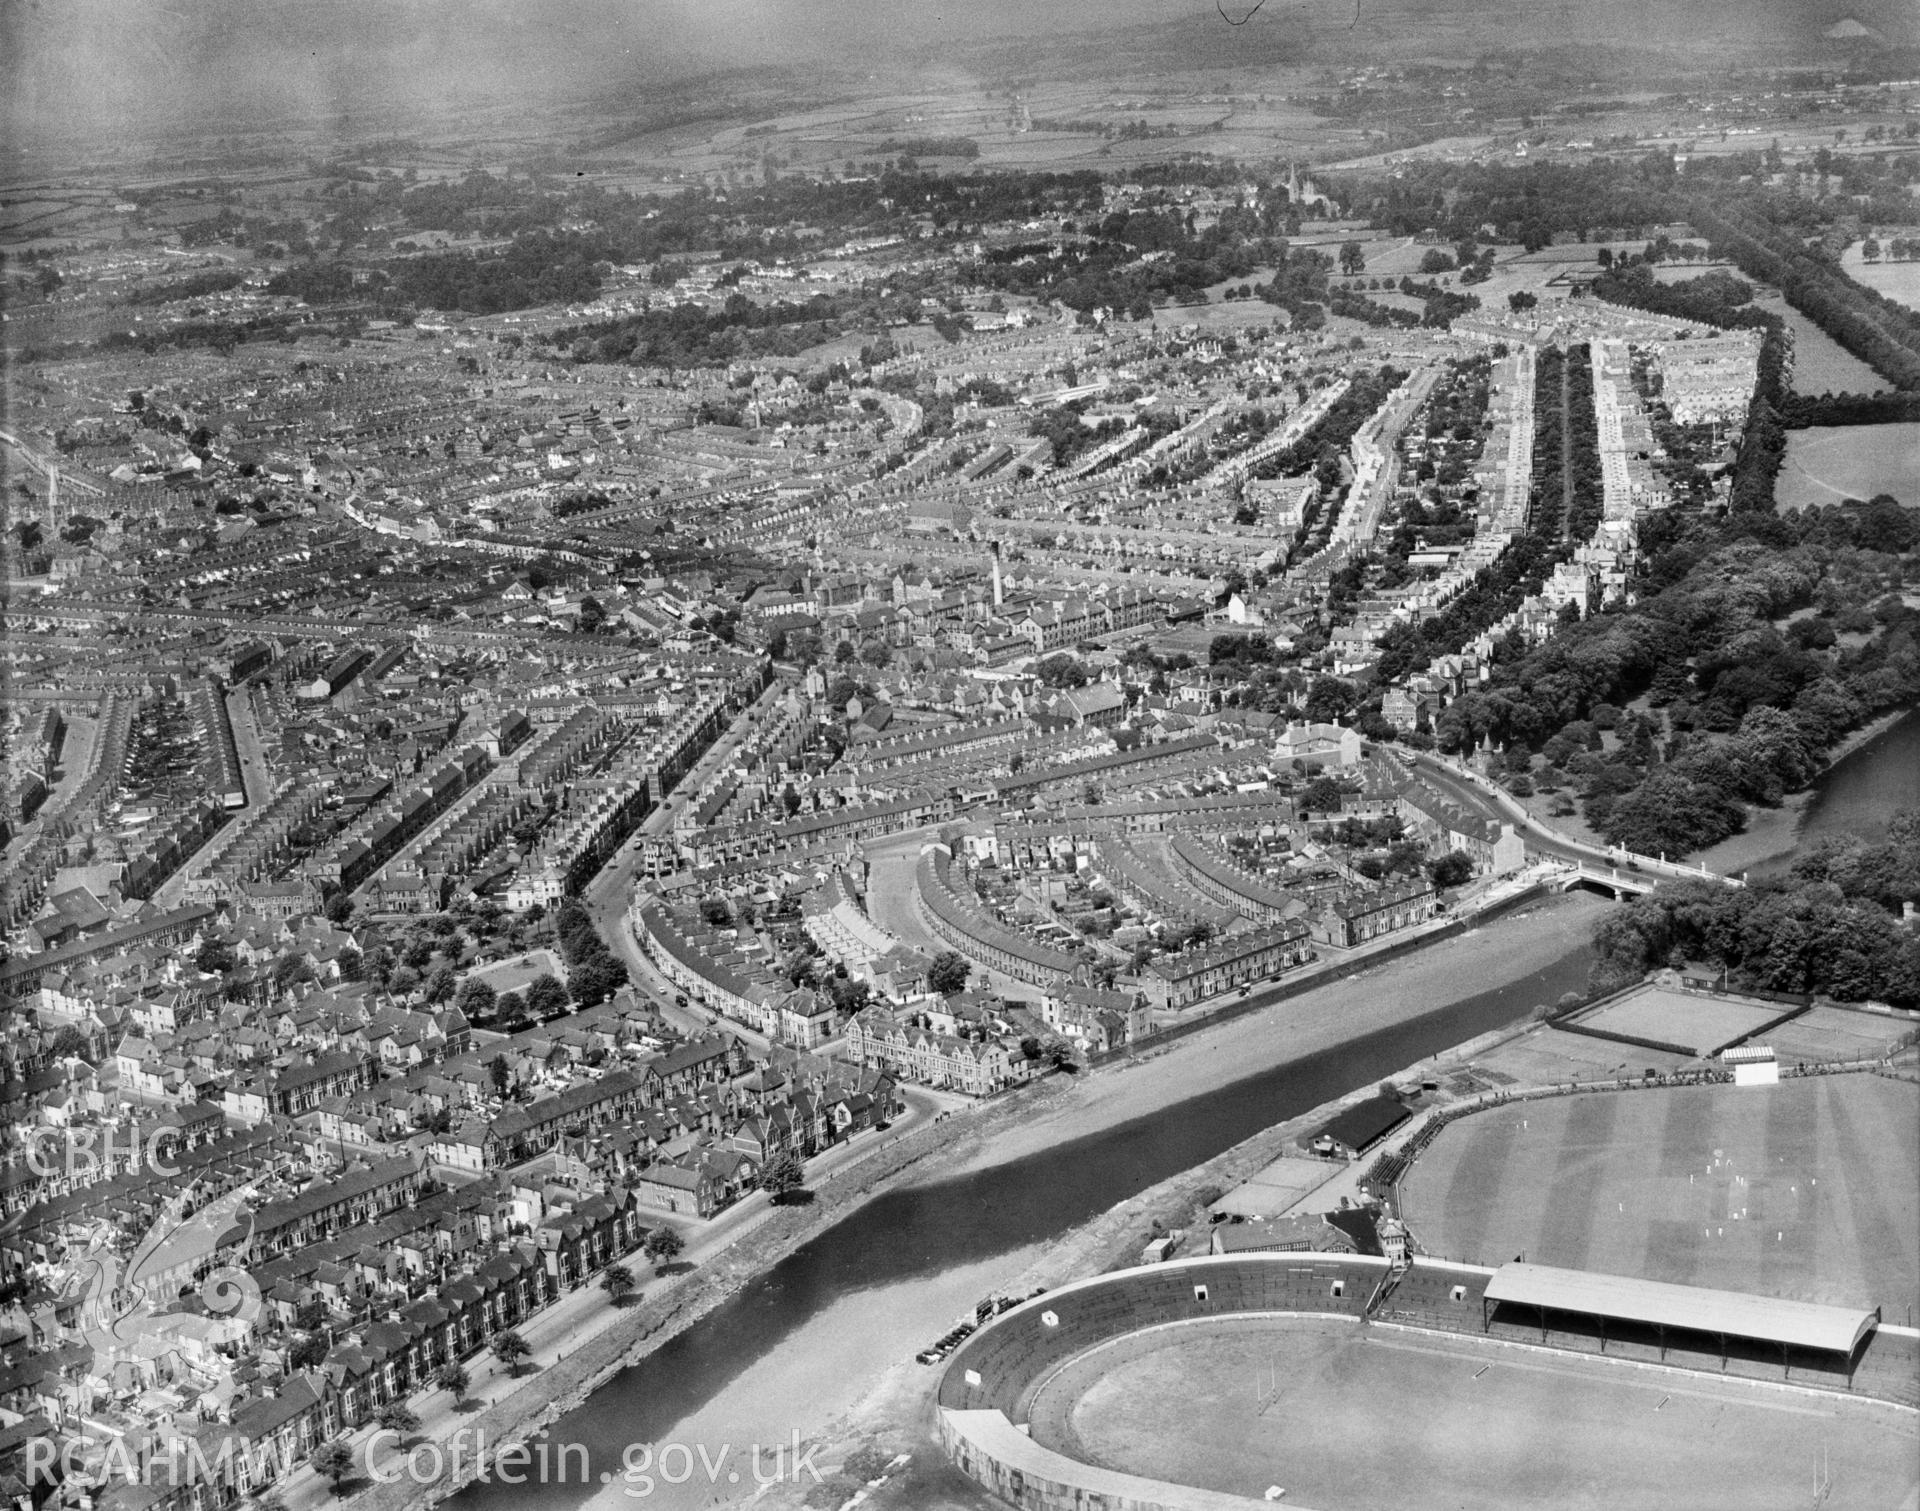 View of the Riverside area of Cardiff showing Cardiff Arms Park and cricket ground. Oblique aerial photograph.